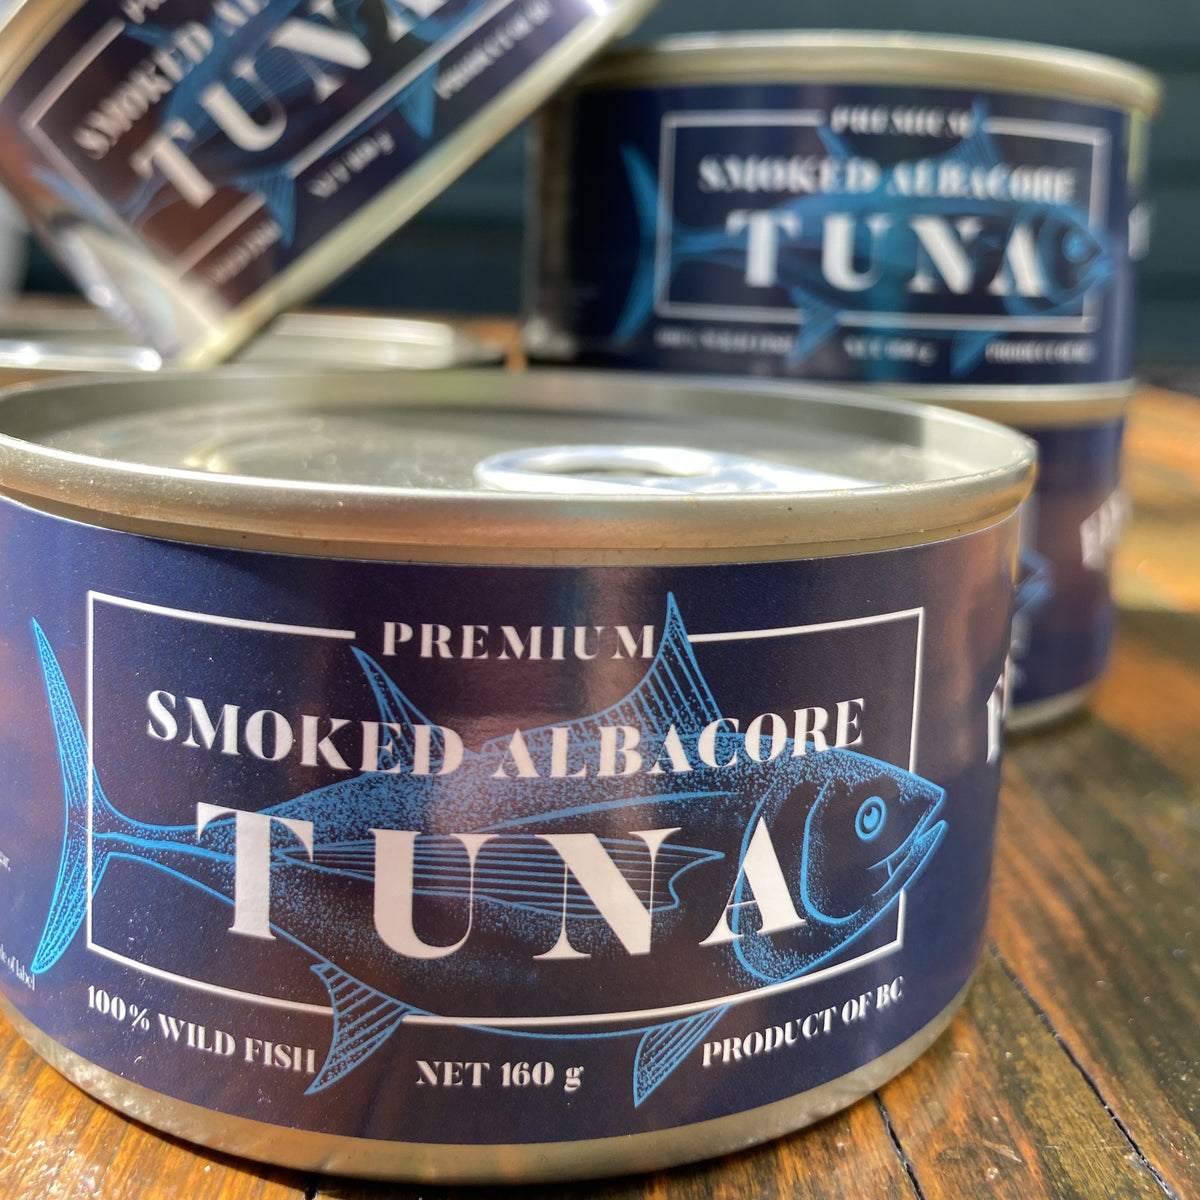 Canned Smoked Albacore Tuna – Finest At Sea